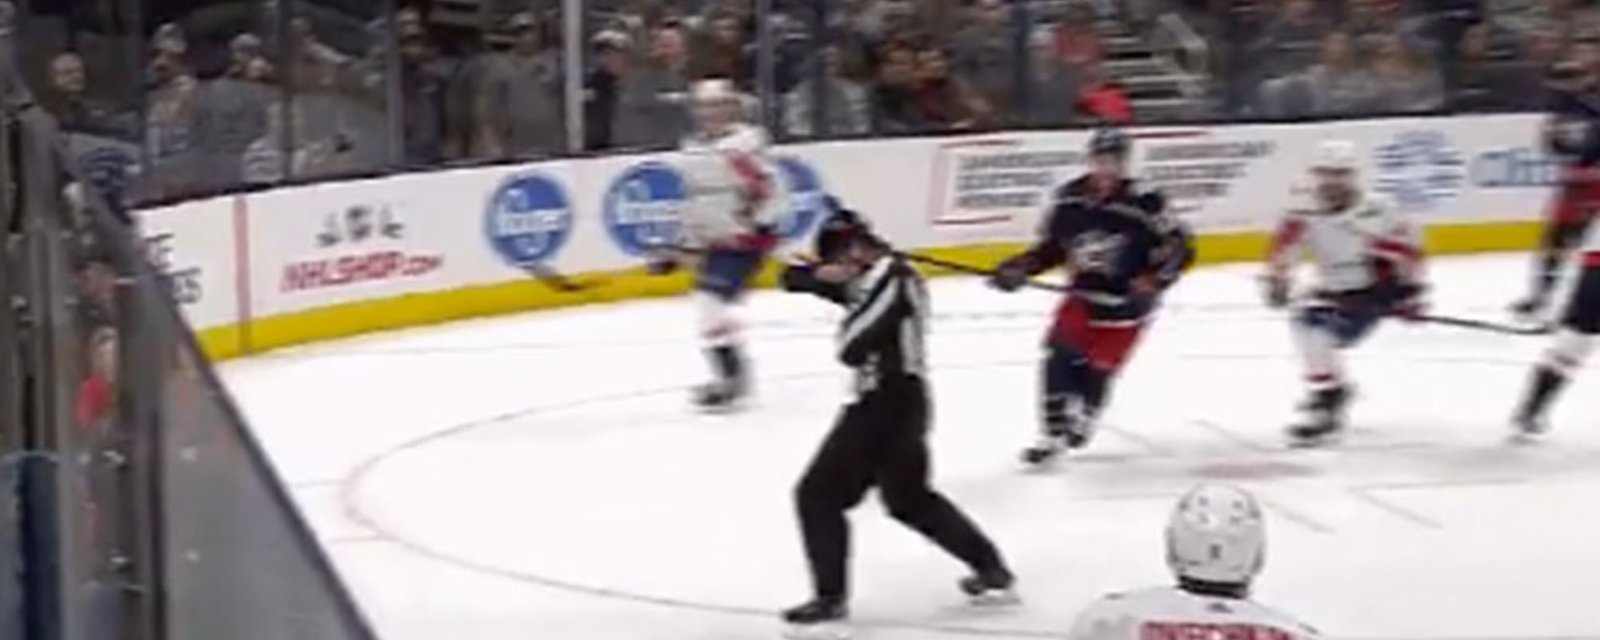 Referee takes a puck to the face in Caps vs Blue Jackets game